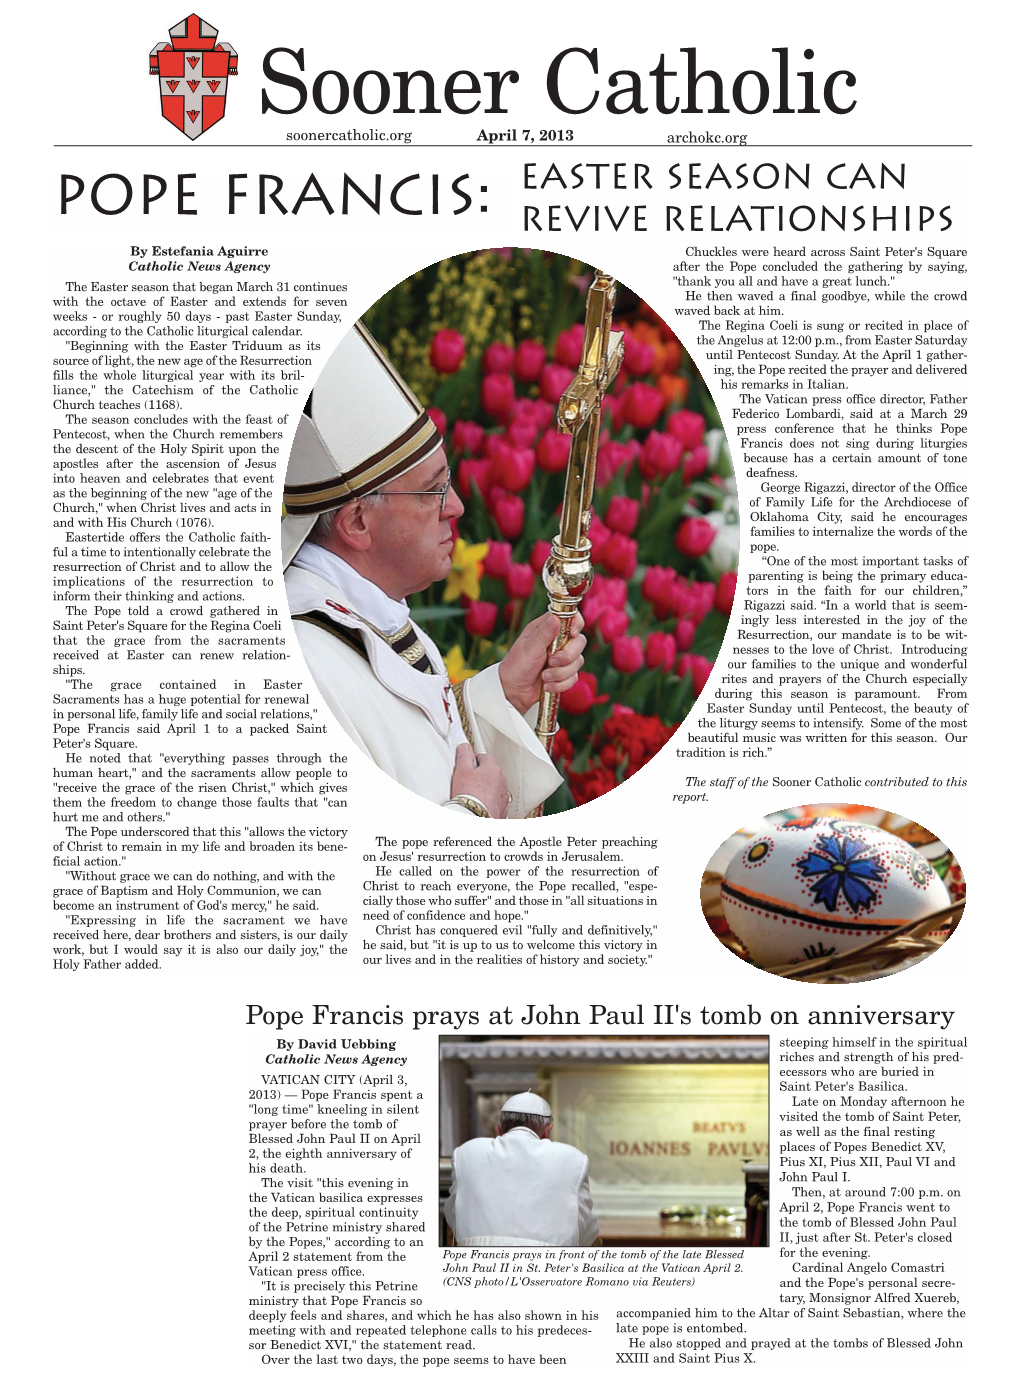 Pope Francis: Revive Relationships